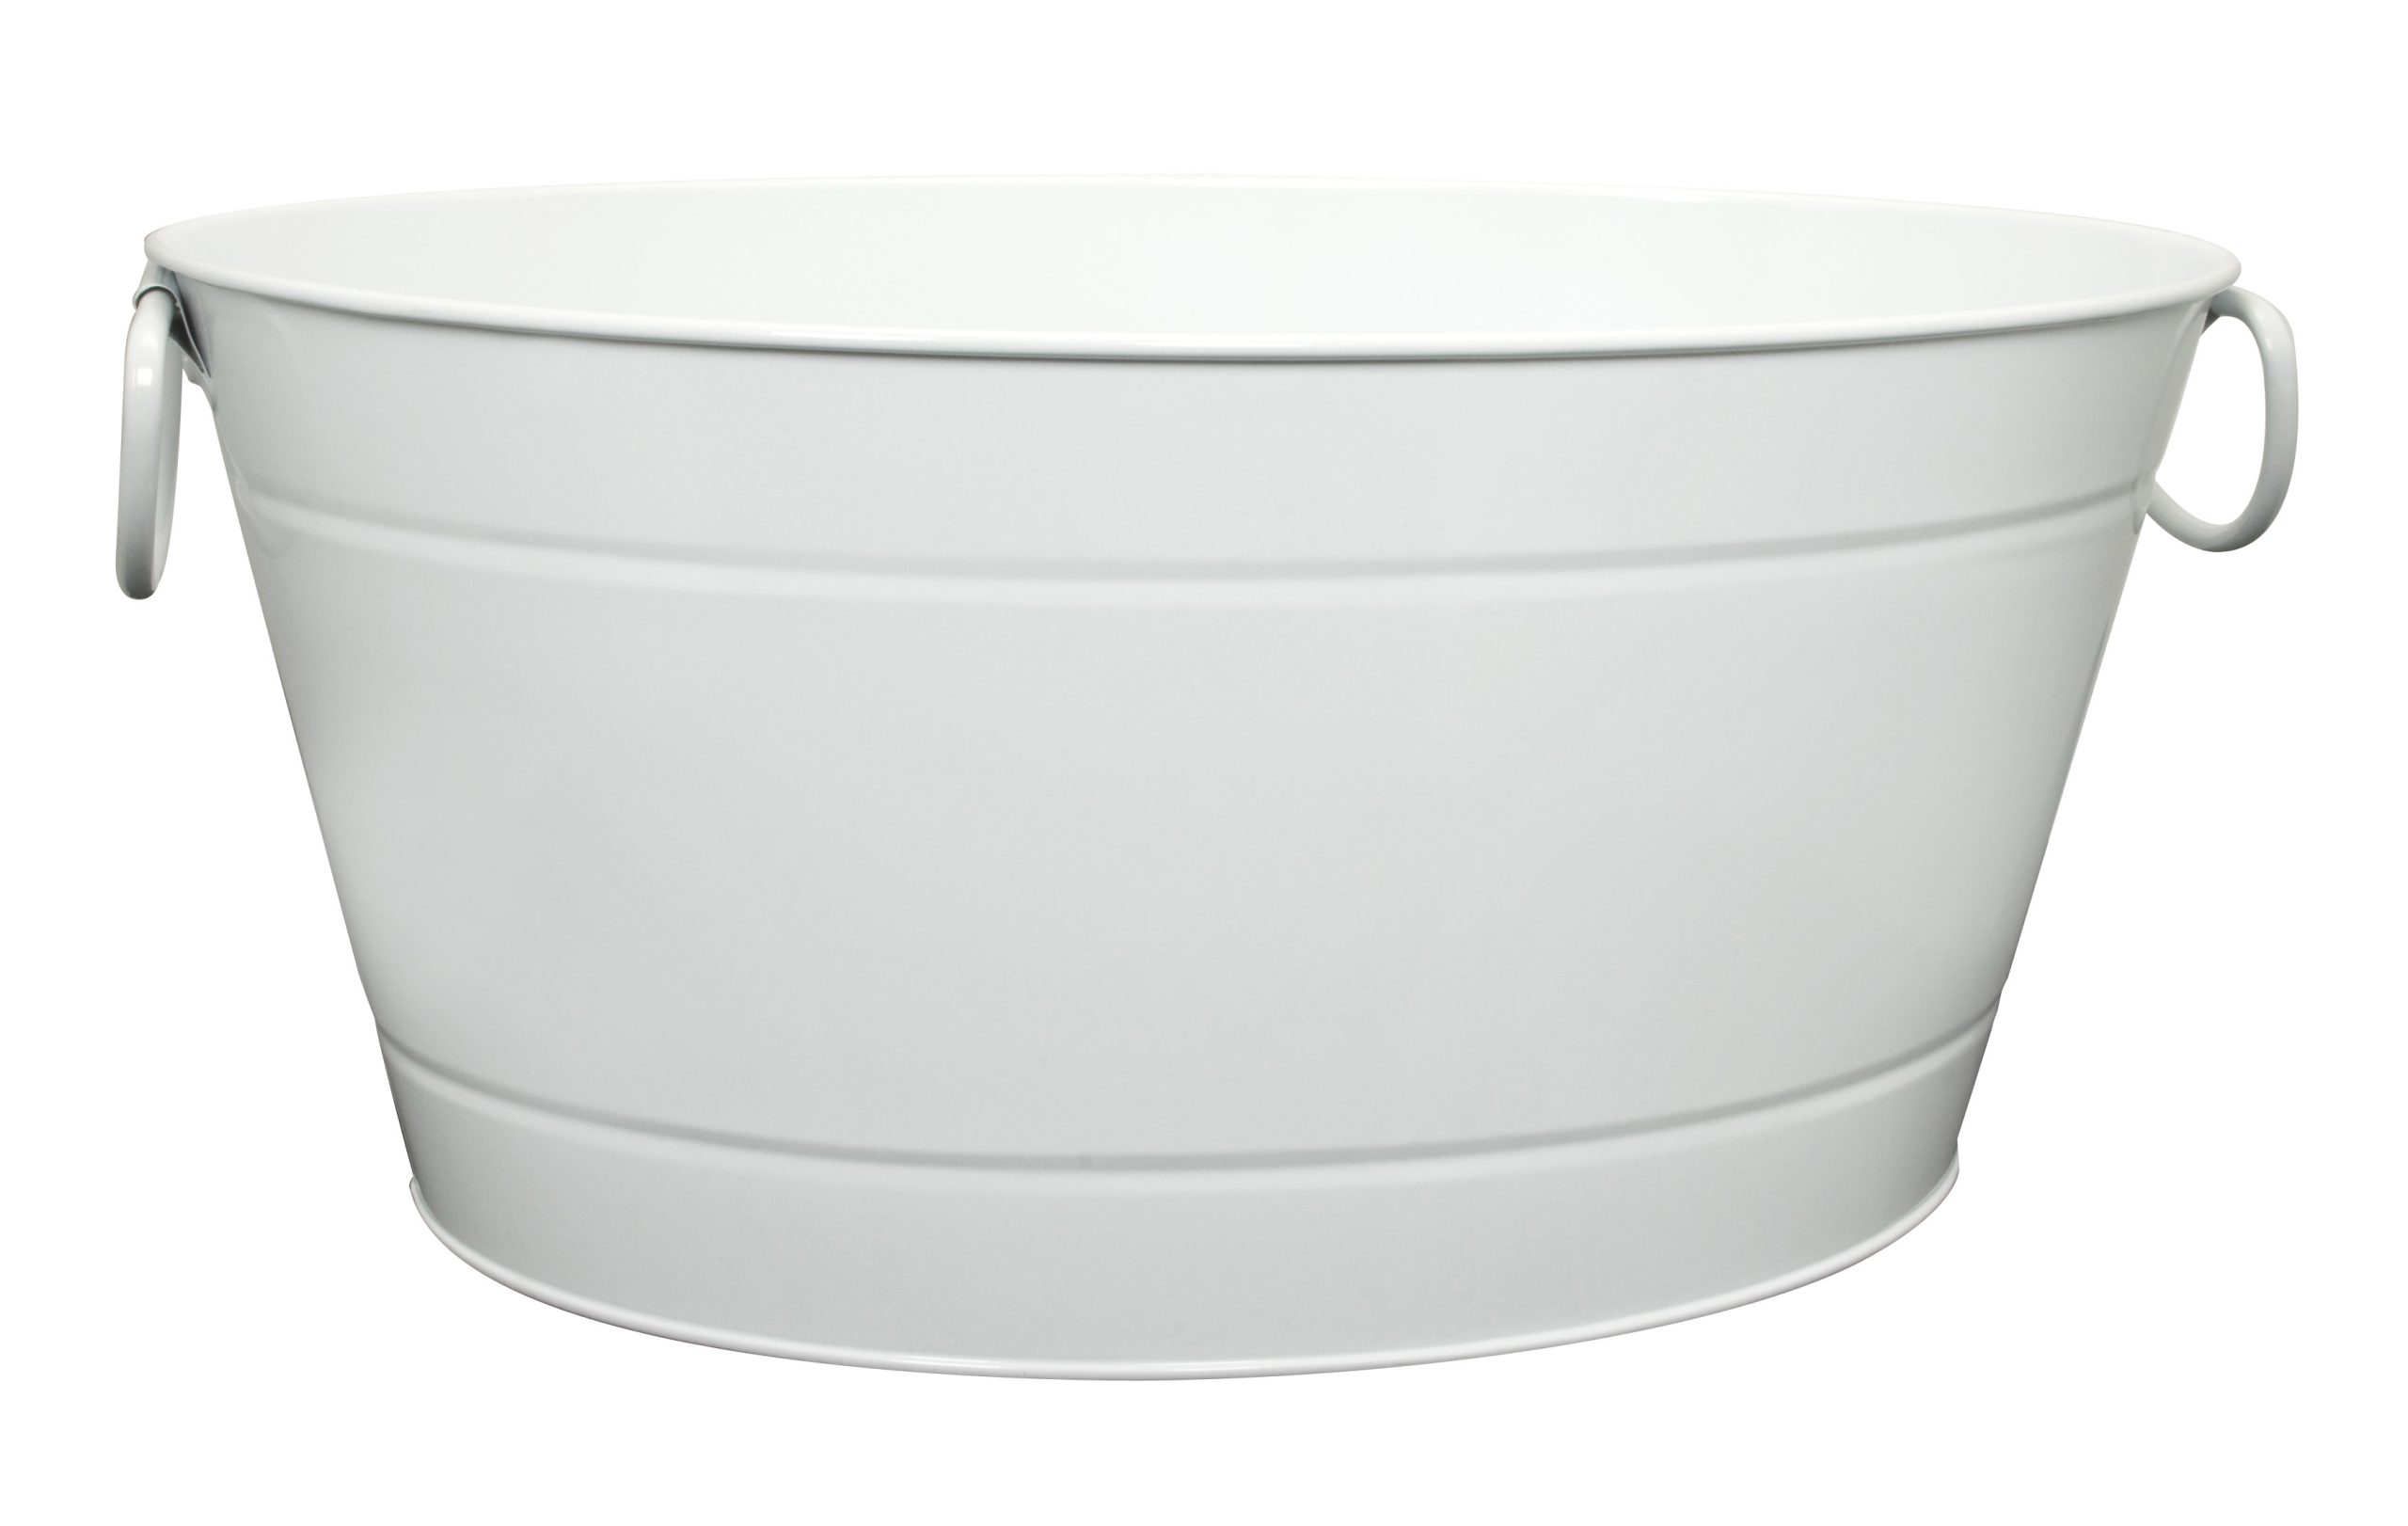 Party tub - Painted metal WHITE 50x32cm - h 23 ILSA Italy